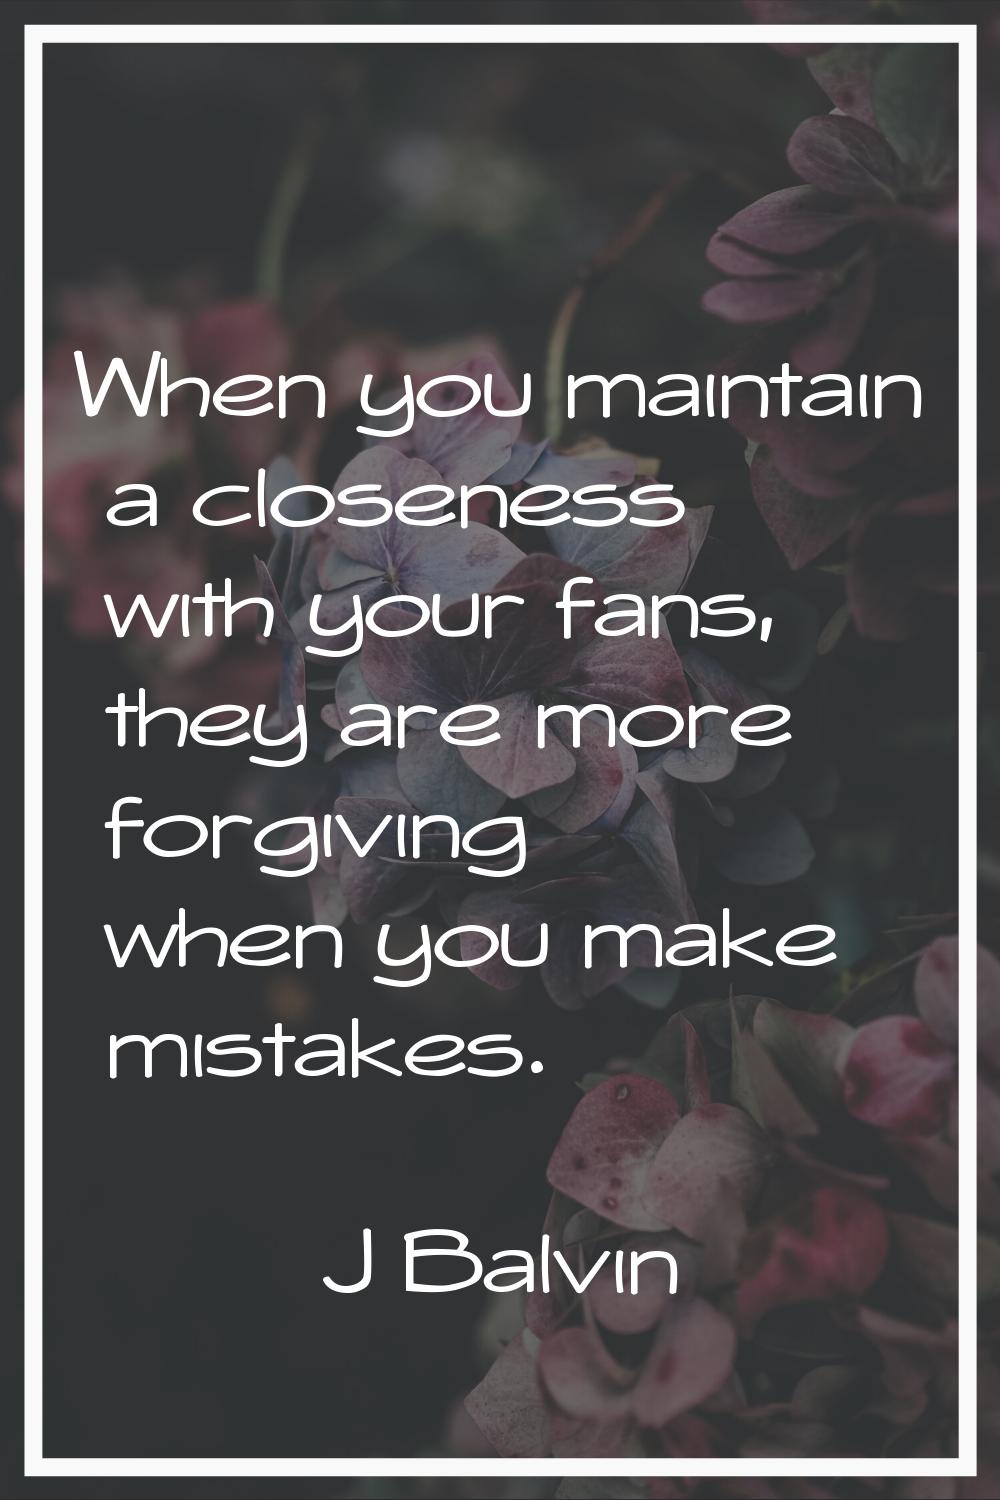 When you maintain a closeness with your fans, they are more forgiving when you make mistakes.